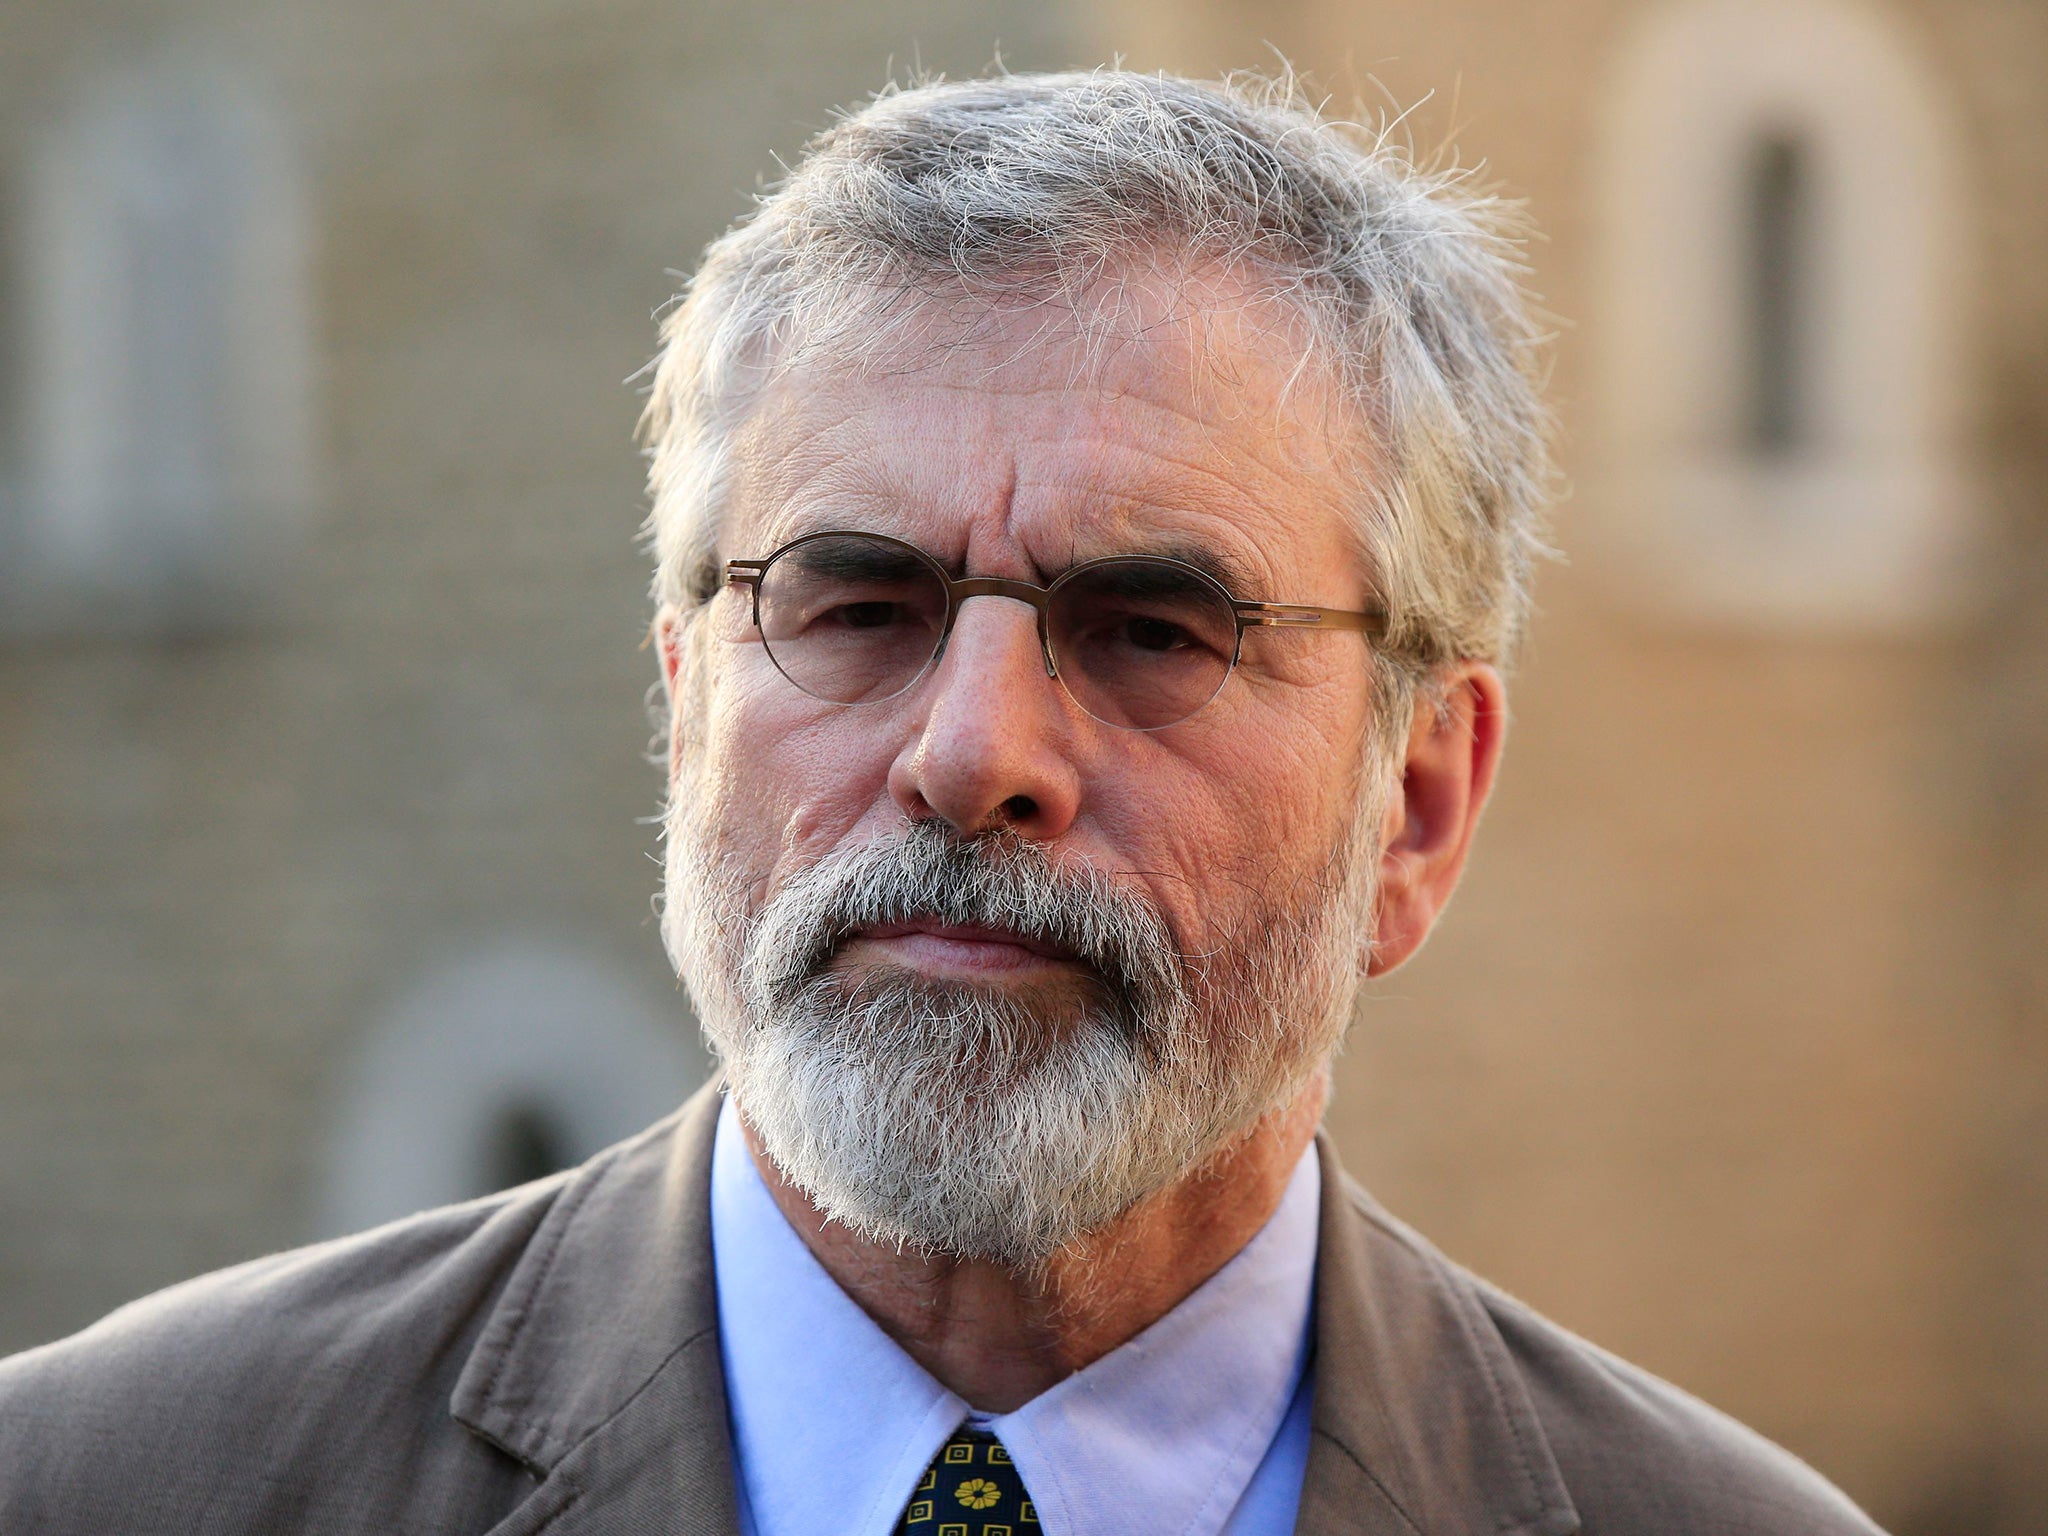 Gerry Adams has insisted that the IRA was not involved in the murder of Kevin McGuigan